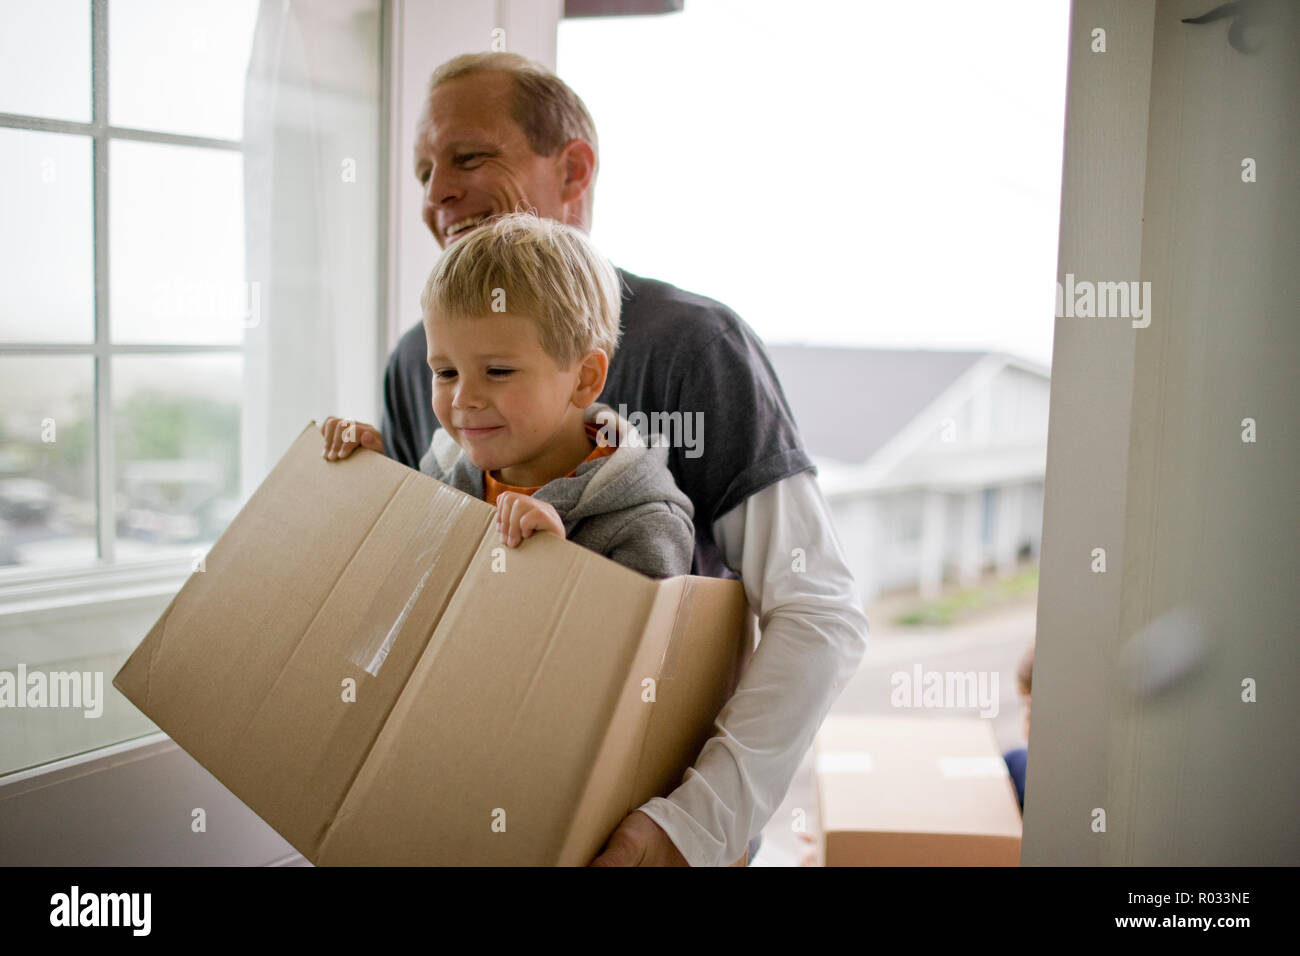 Father carrying son in box while moving house Stock Photo